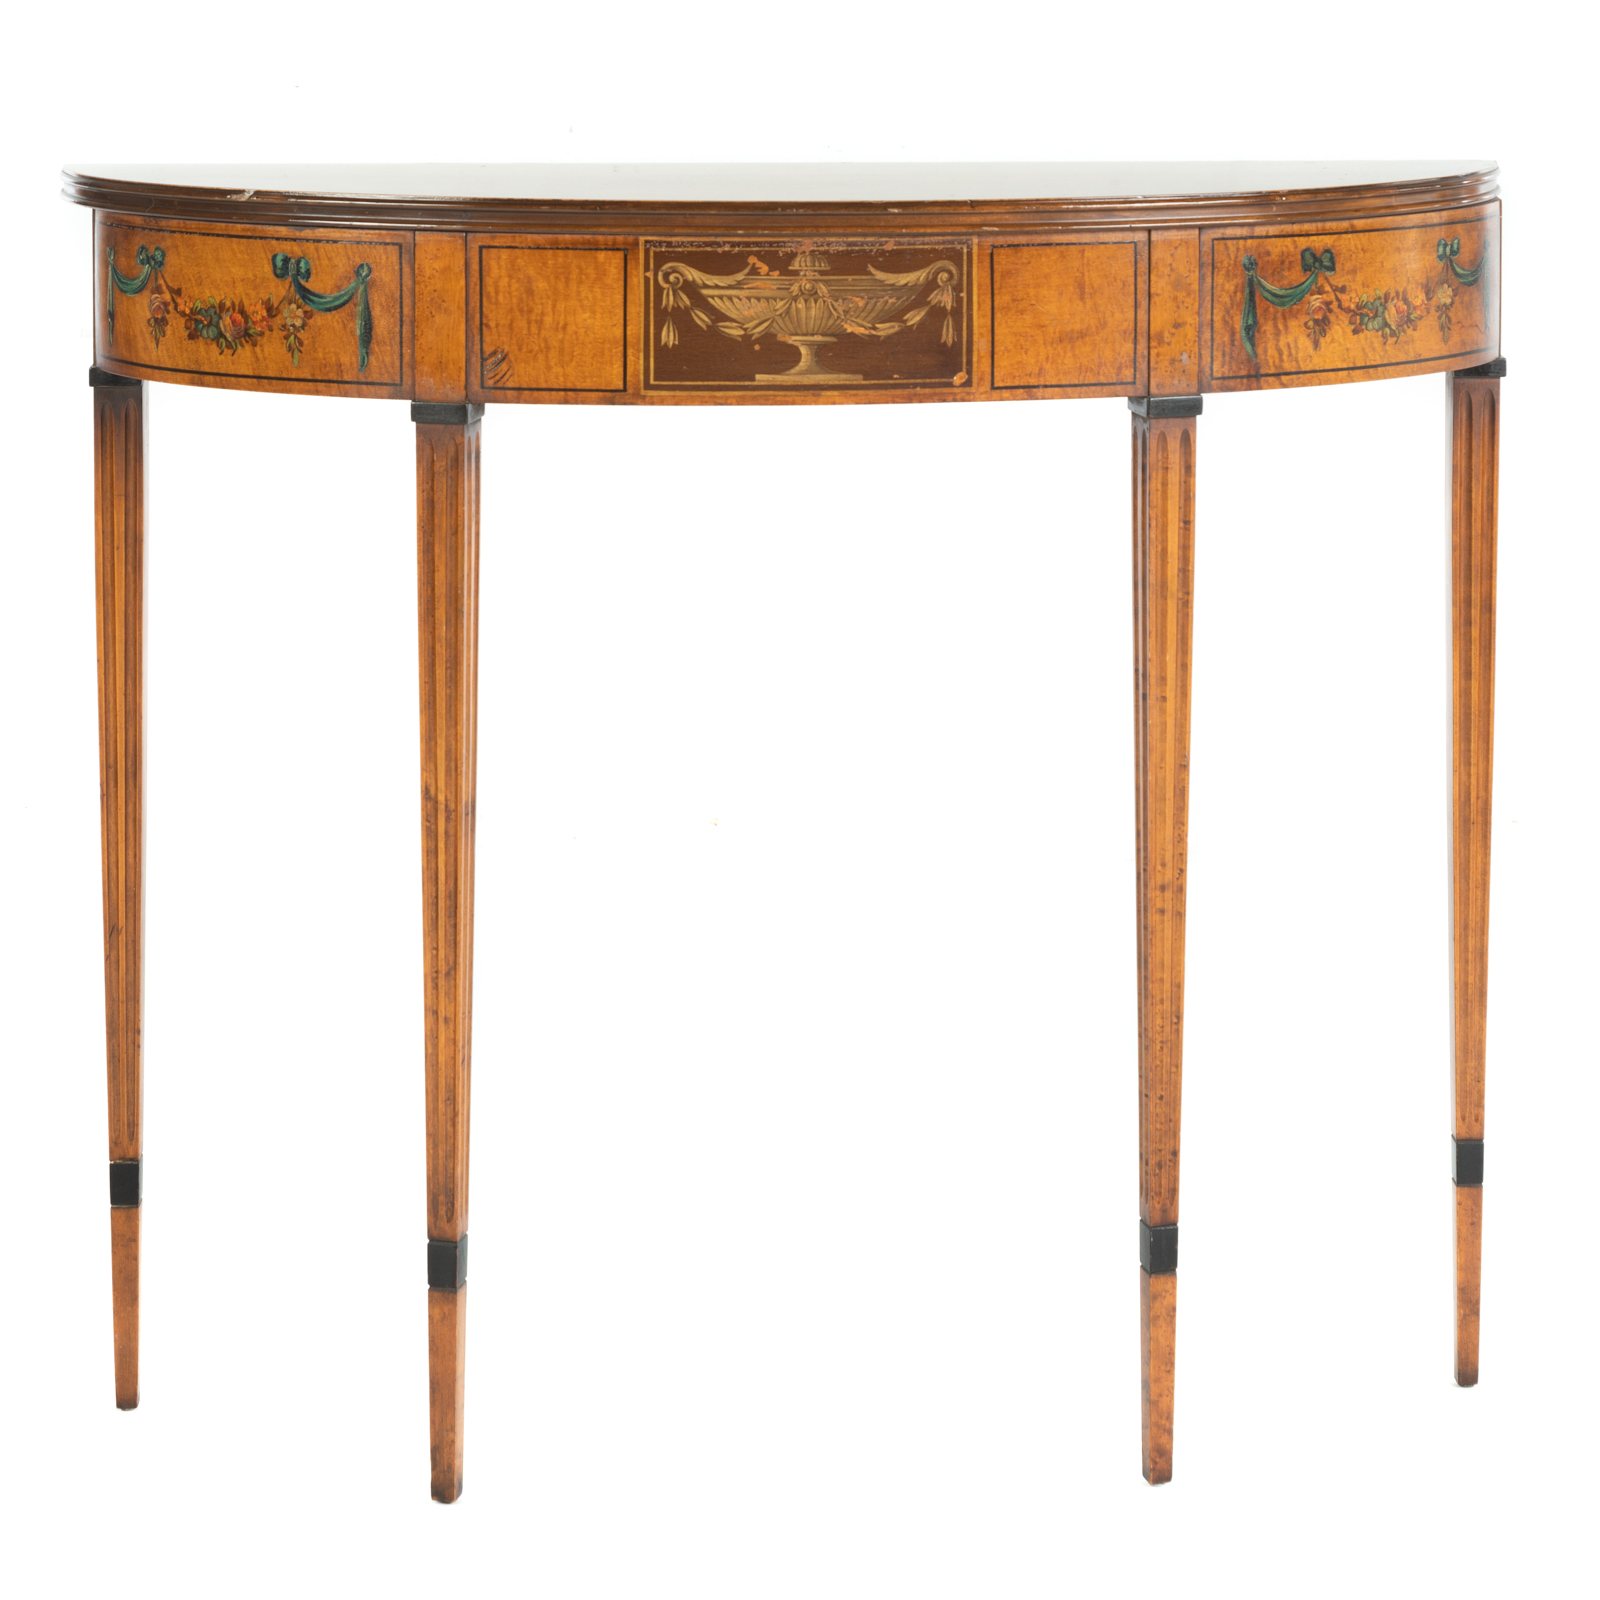 ADAM STYLE DEMILUNE HALL TABLE 36a9c4